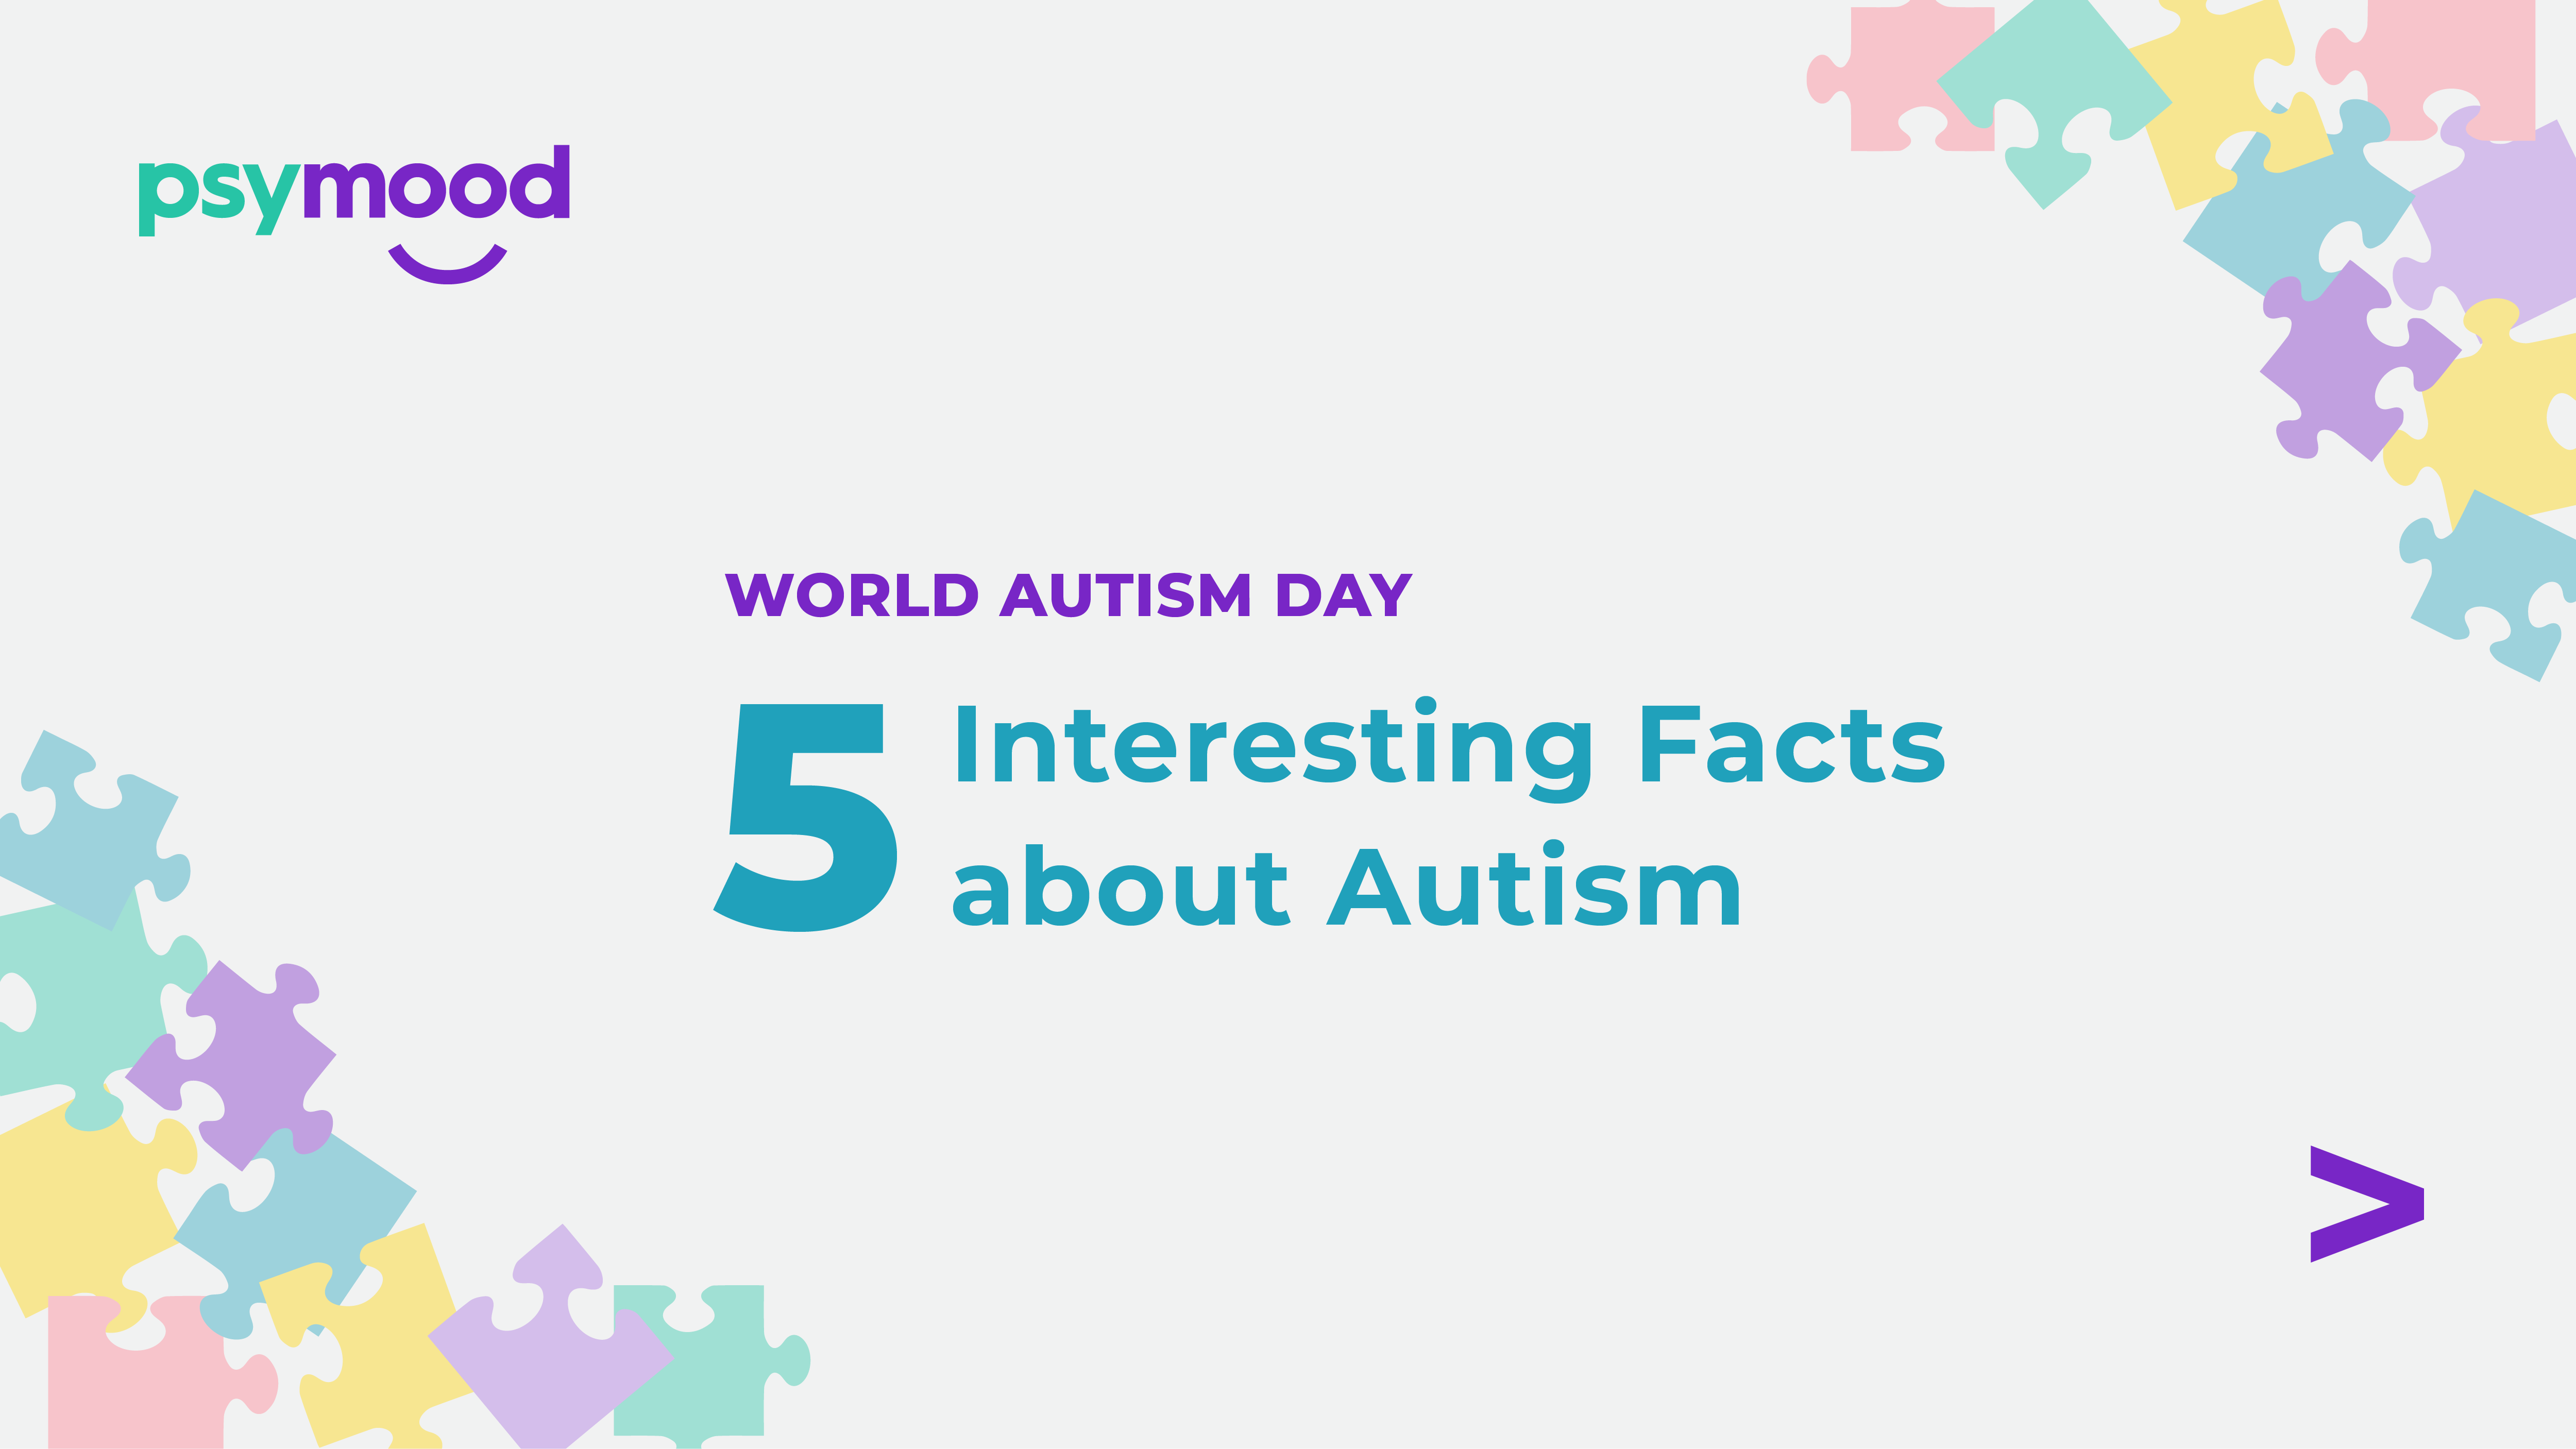 Five interesting facts about Autism